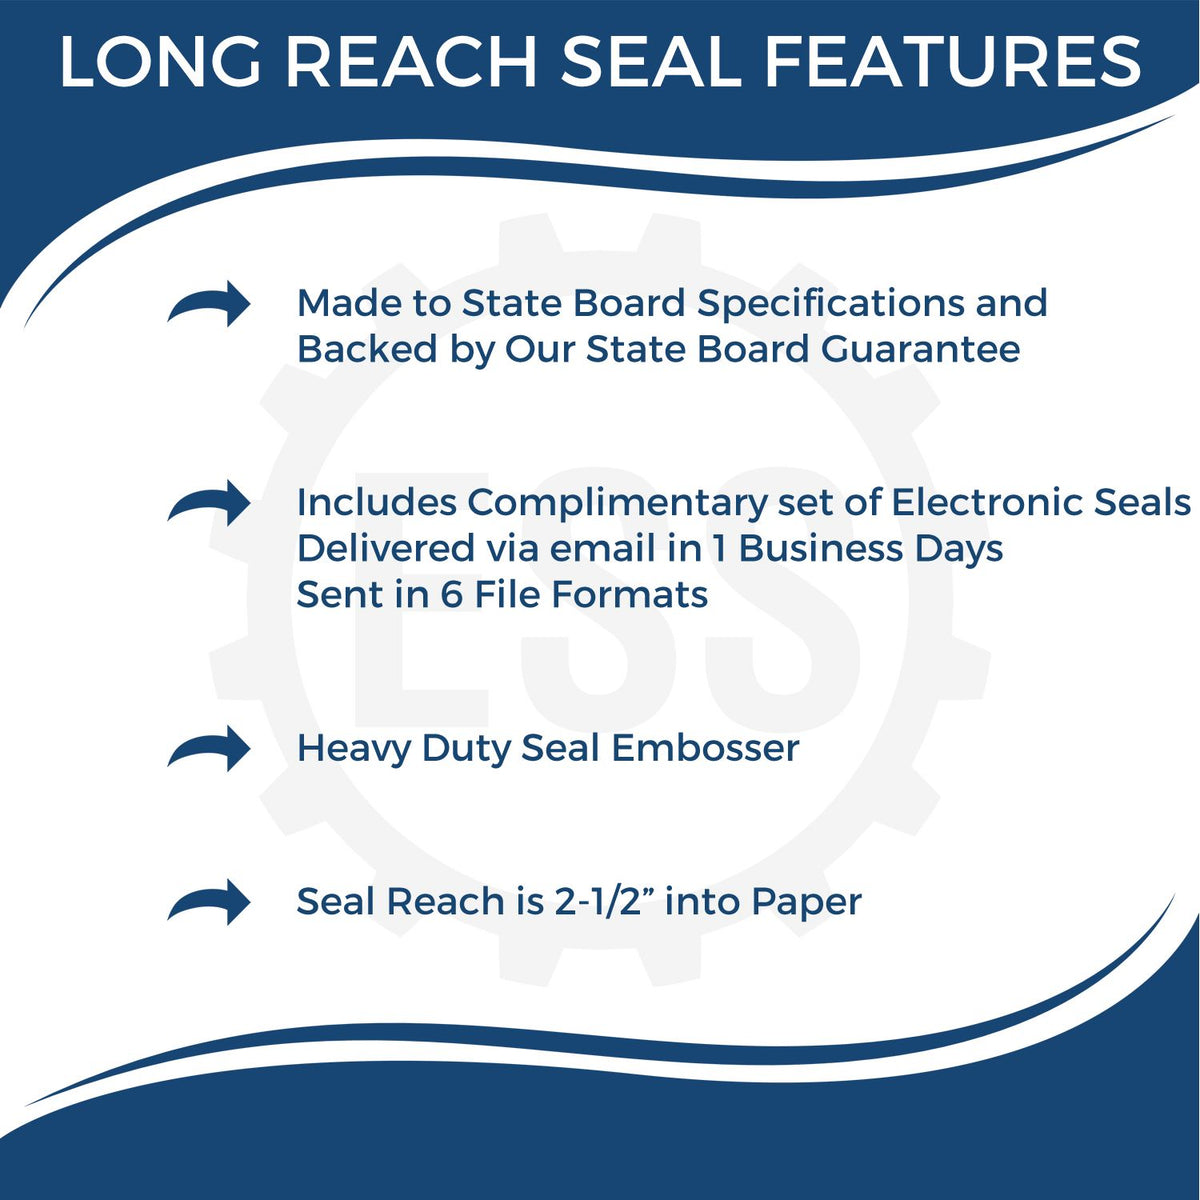 A picture of an infographic highlighting the selling points for the Long Reach Montana Geology Seal